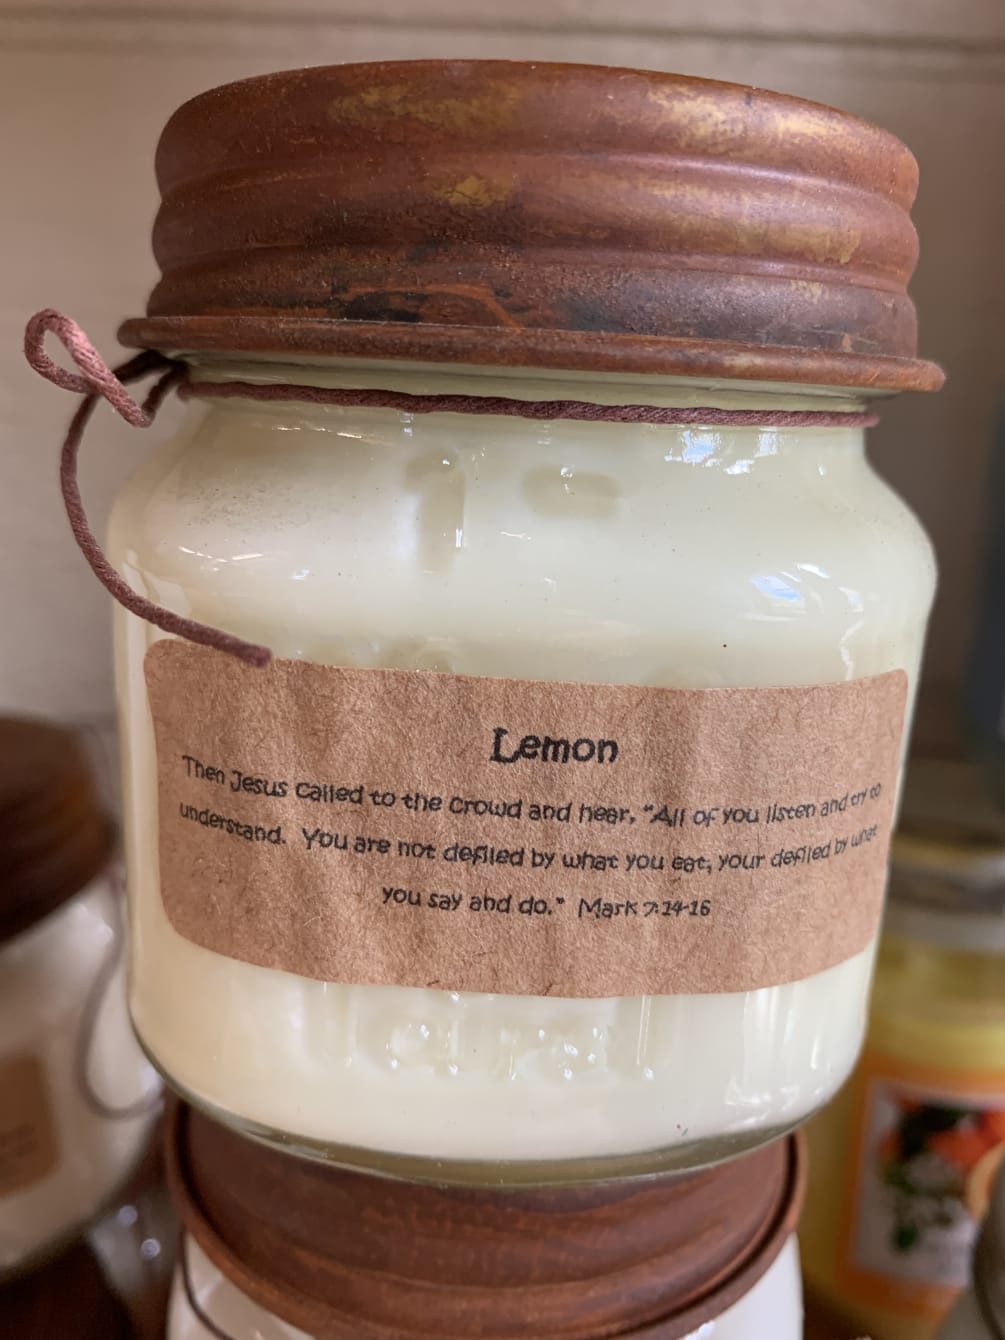 Lemon scented mason jar candle with biblical message.
Made by Frontier Rose Candles